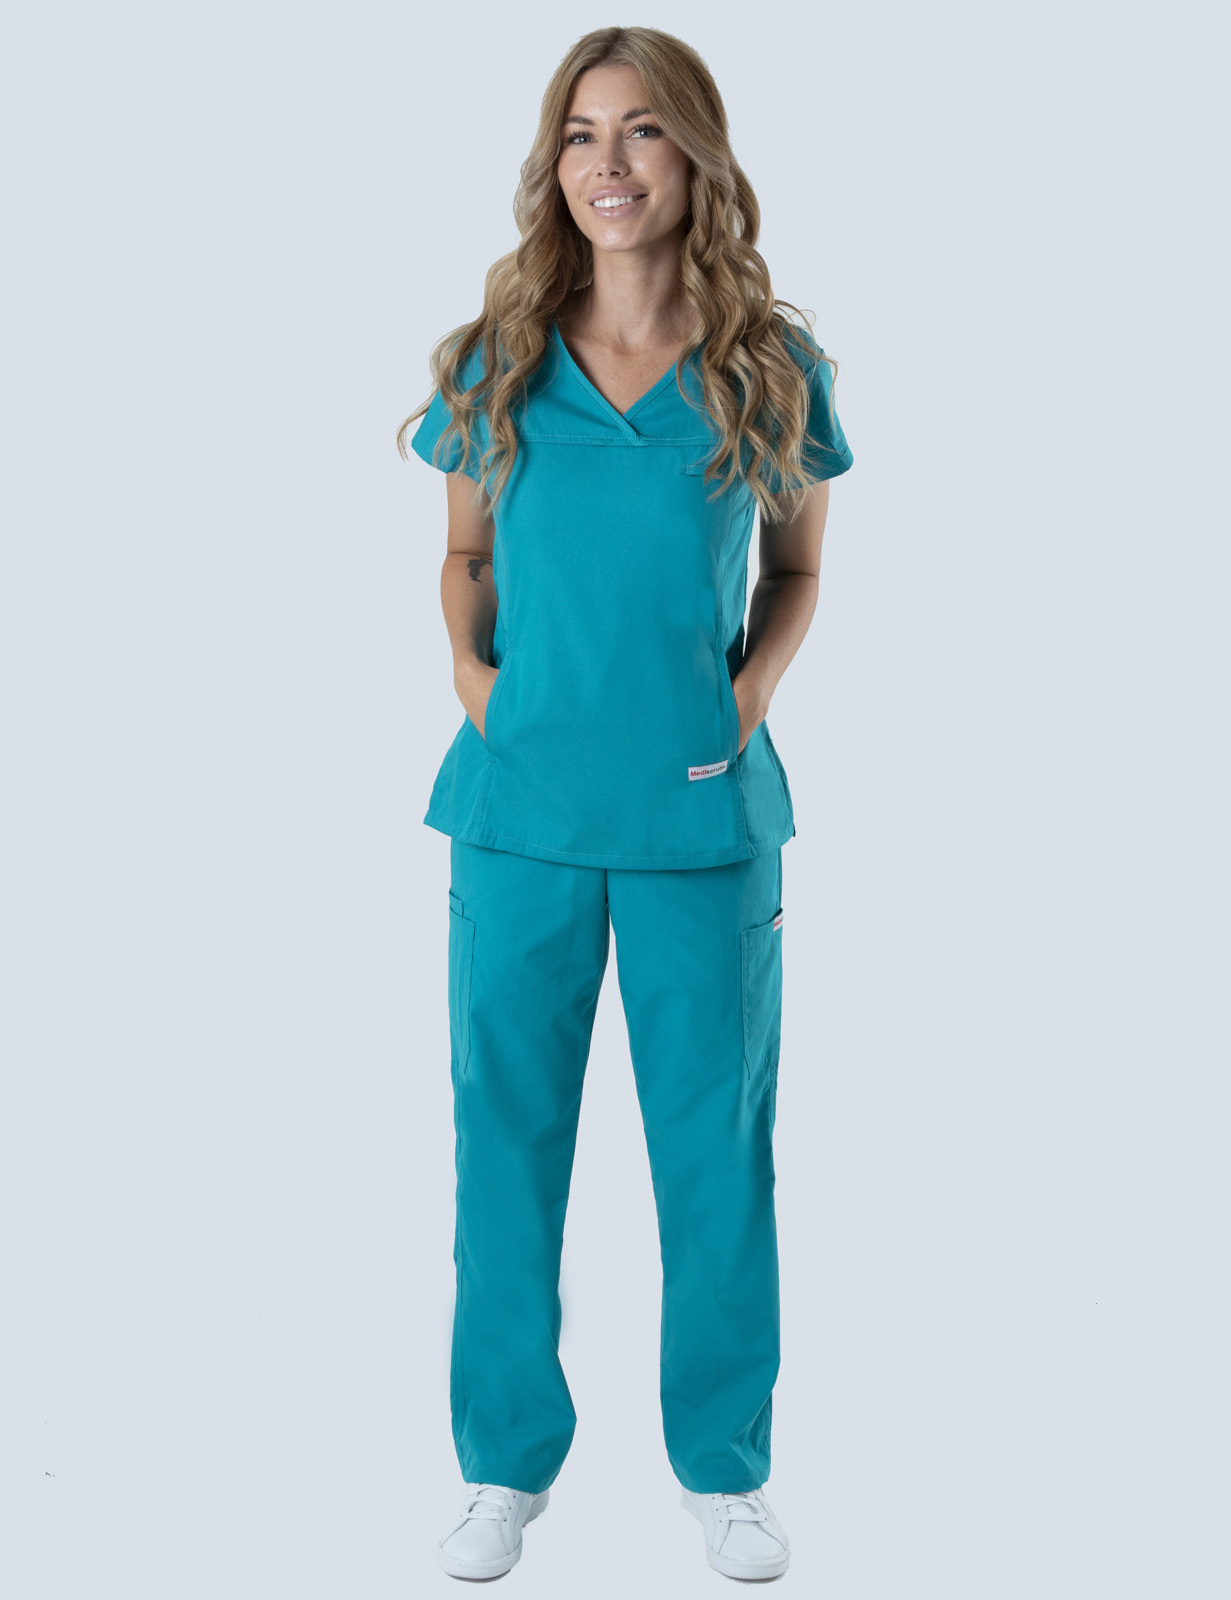 Gympie Hospital AIN (Women's Fit Solid Scrub Top and Cargo Pants in Teal incl Logos)